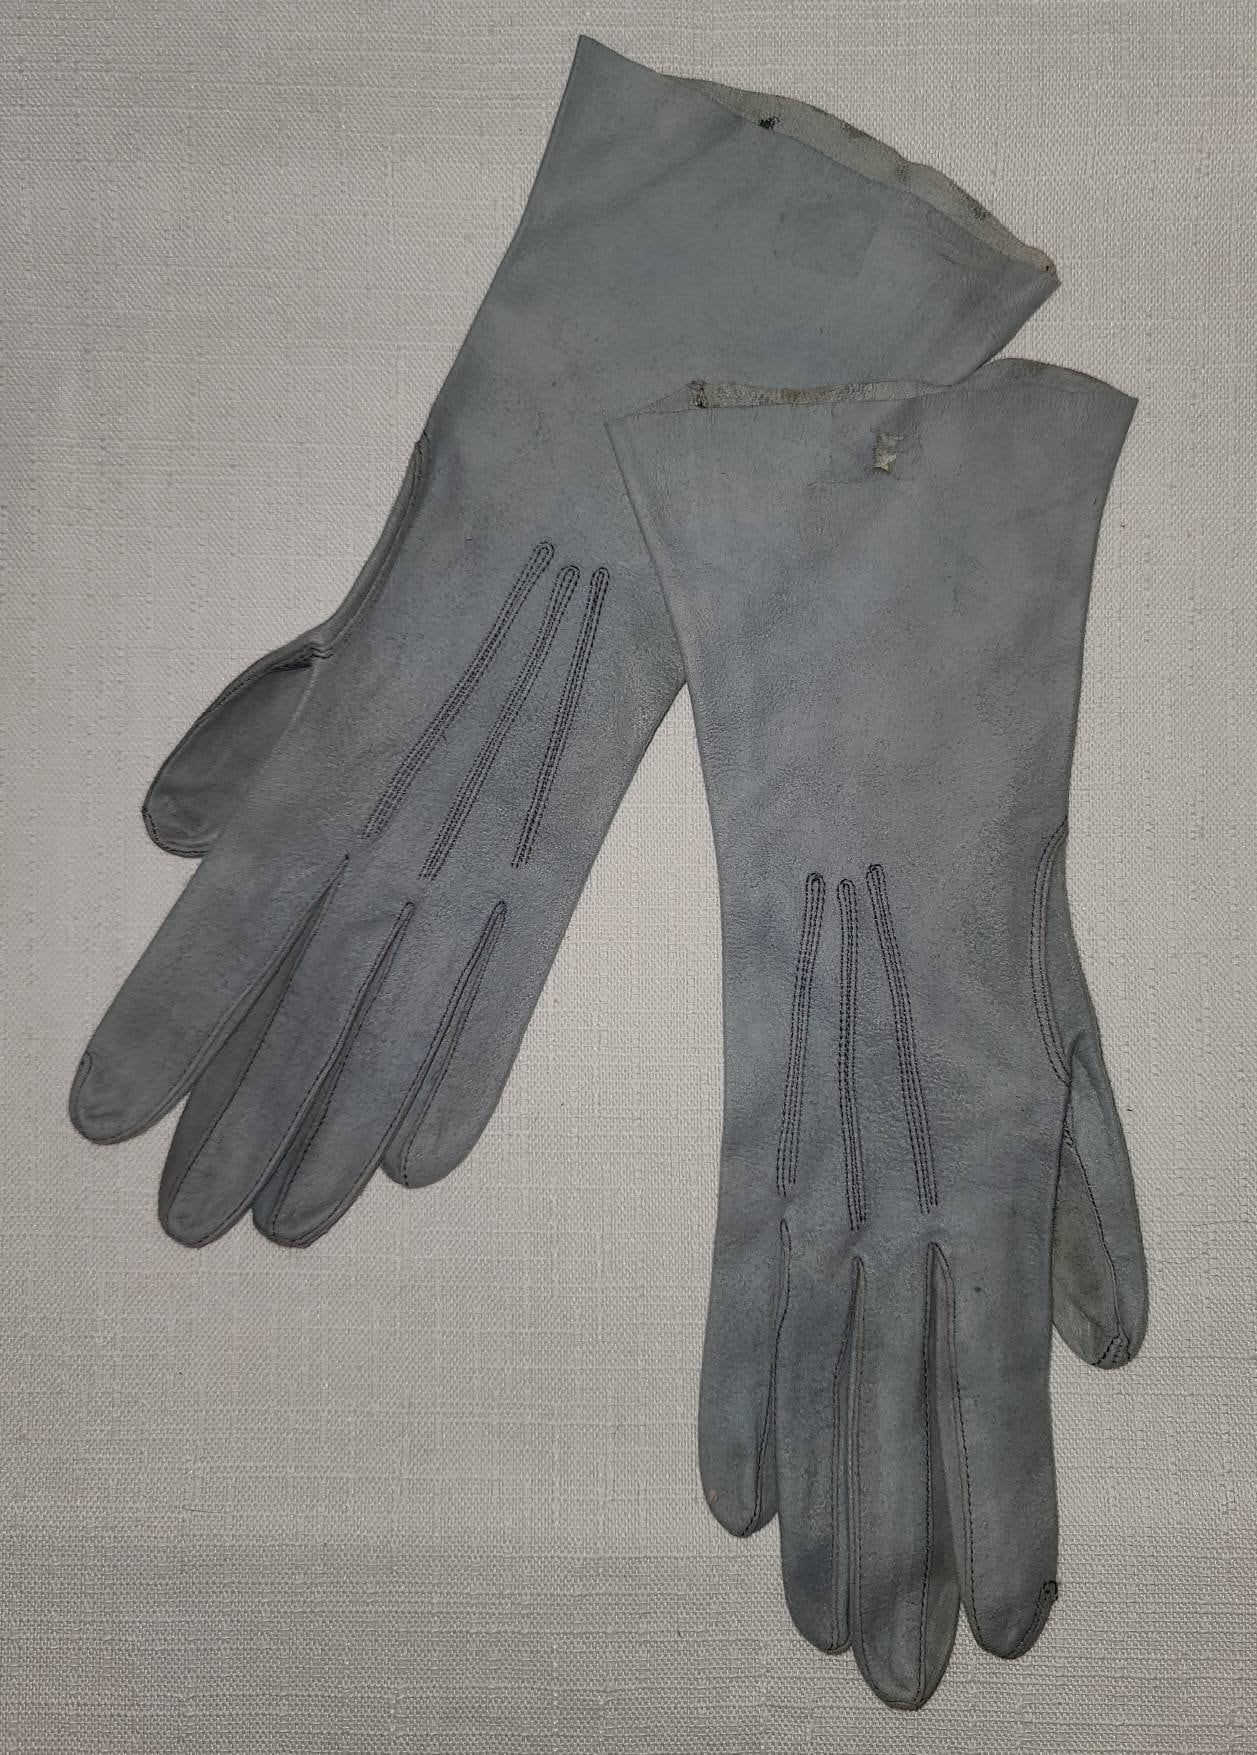 Vintage Suede Gloves Thin 1950s Periwinkle Light Blue Suede Gloves Rockabilly a few flaws